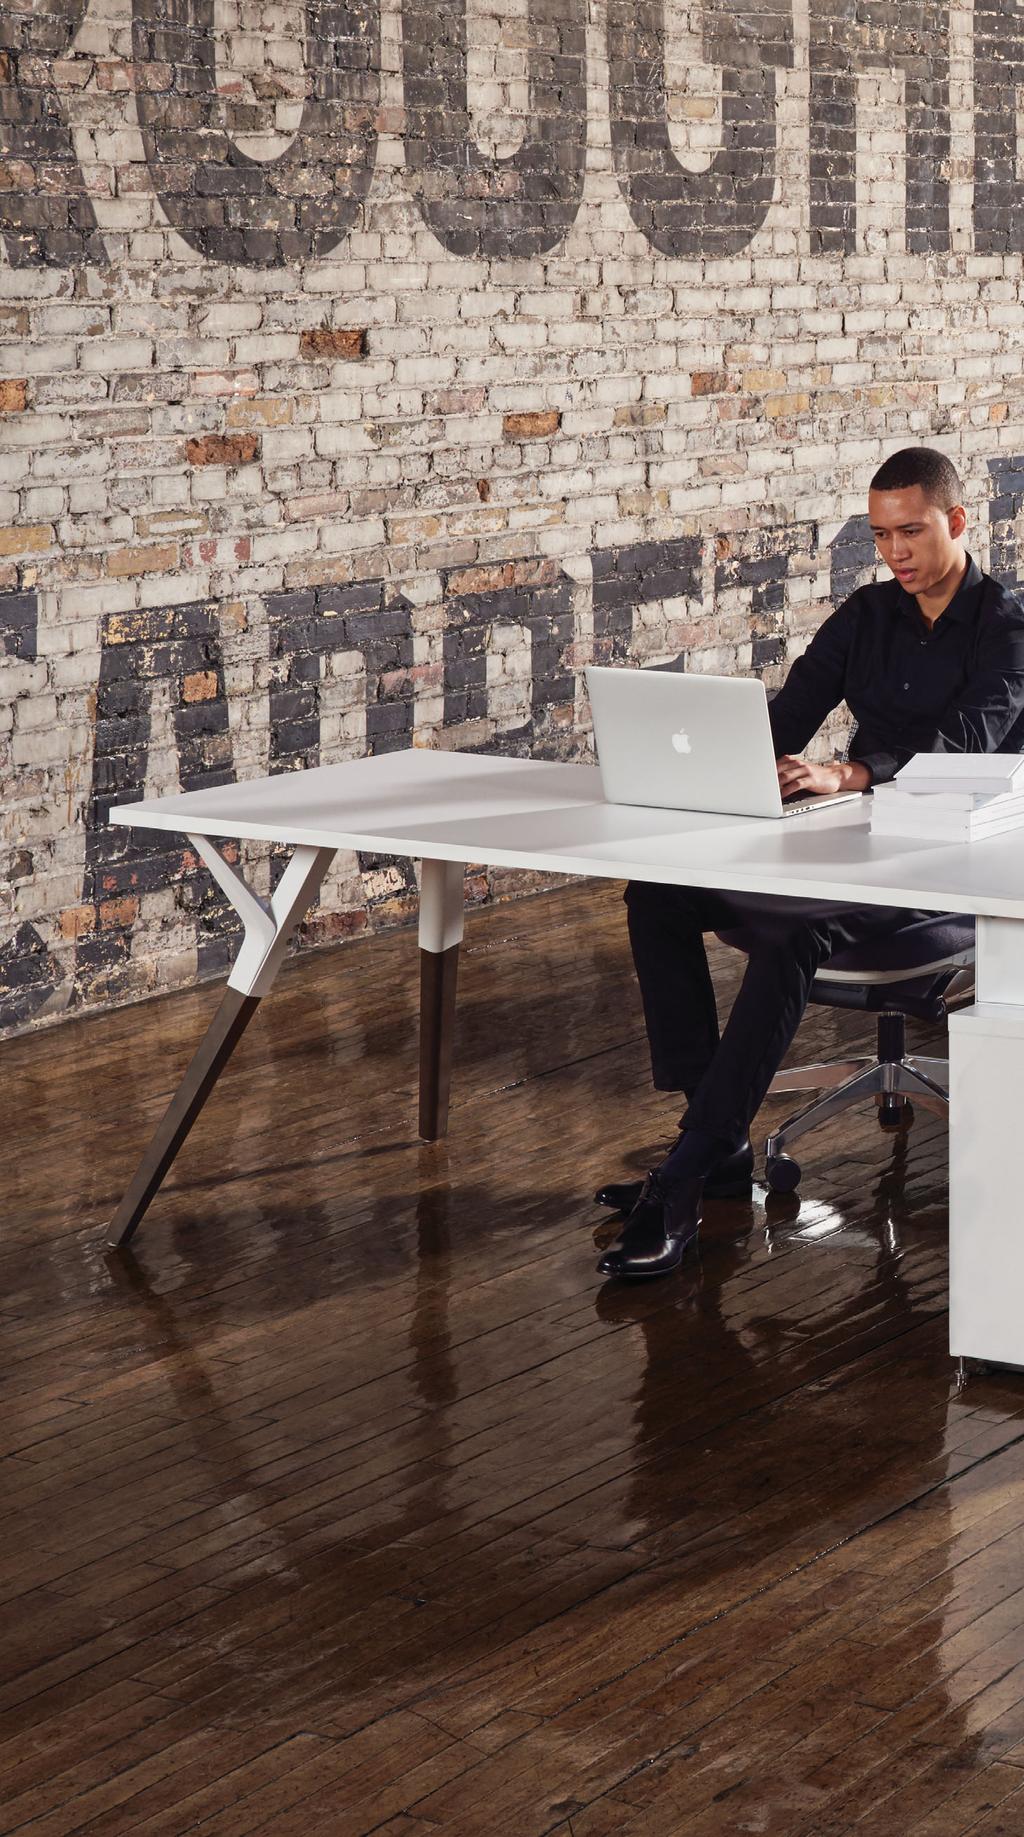 desking systems The Y Leg upstage Launched in June, the upstage workplace furniture system is based on a simple platform or stage that frees users from the